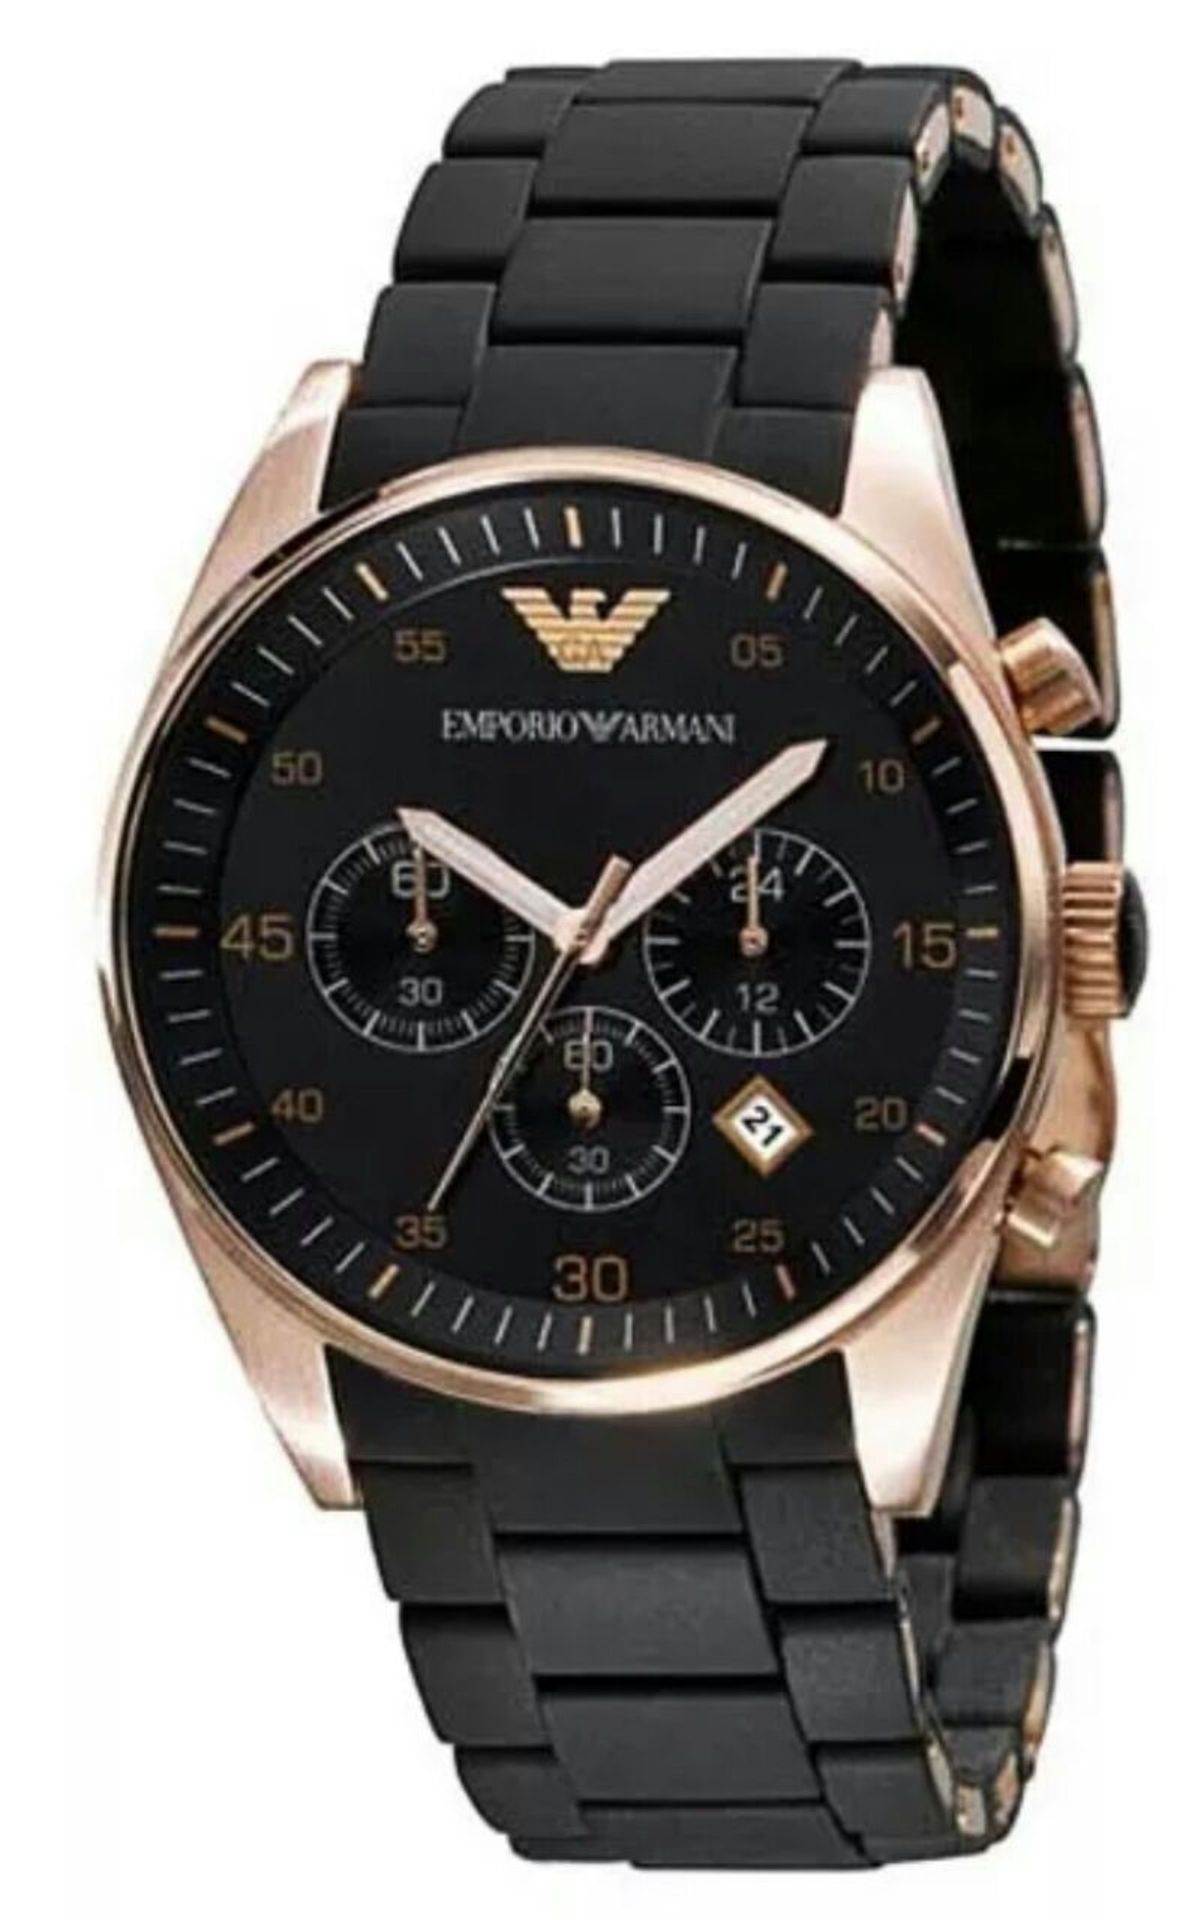 BRAND NEW EMPORIO ARMANI AR5905, GENTS SPORTIVO CHRONOGRAPH WATCH,ROSE GOLD OVER STEEL STRAP, RRP £